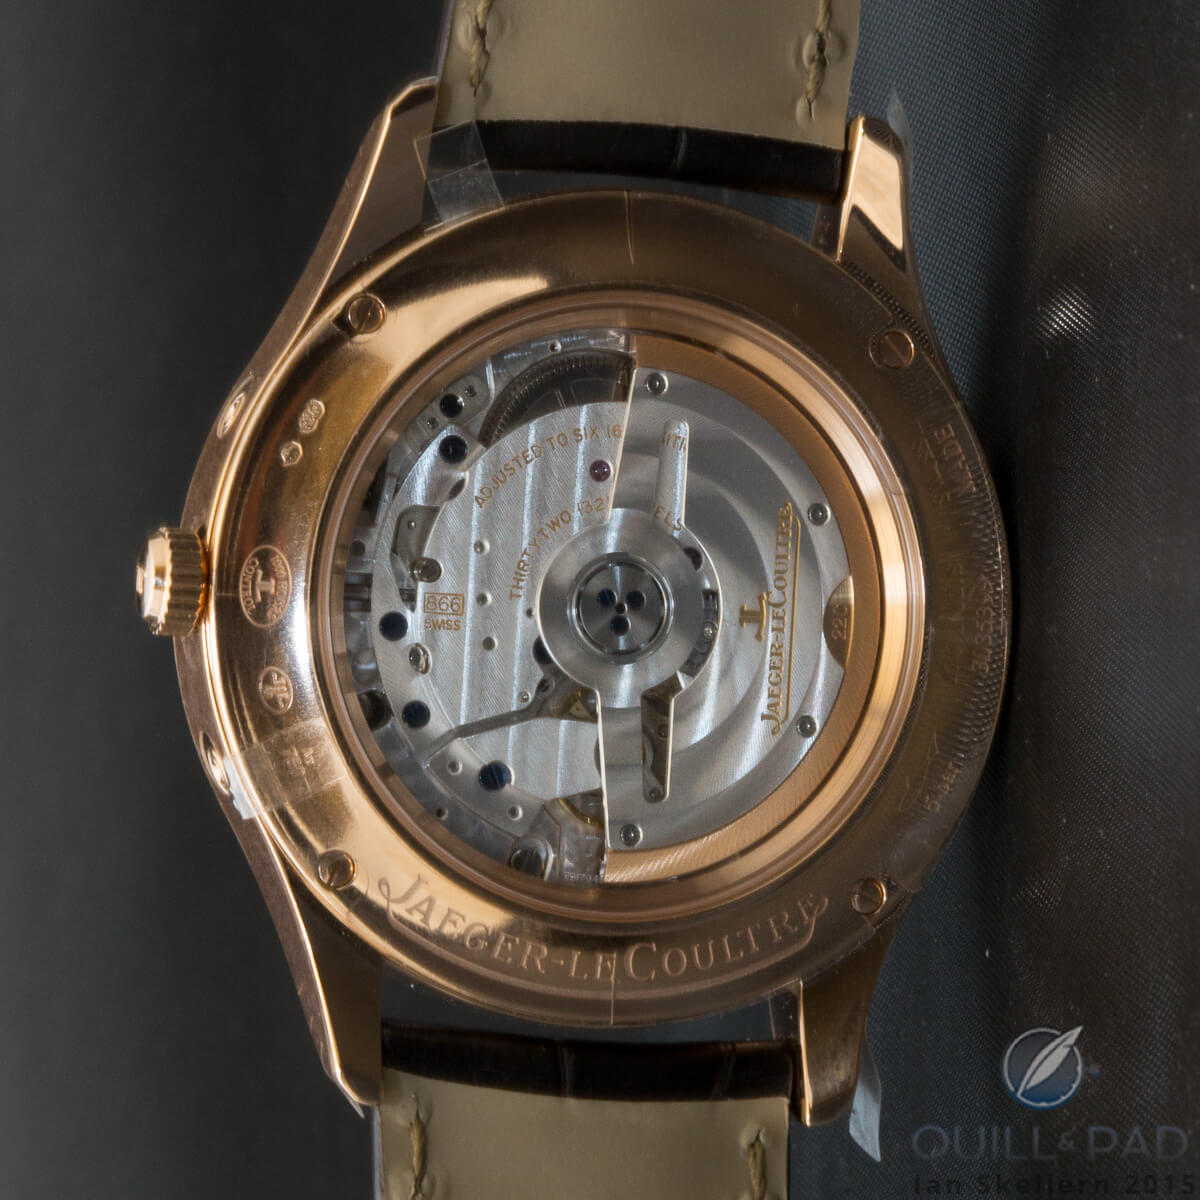 View through the display back of the Jaeger-LeCoultre Master Calendar Meteorite to automatic Caliber 866